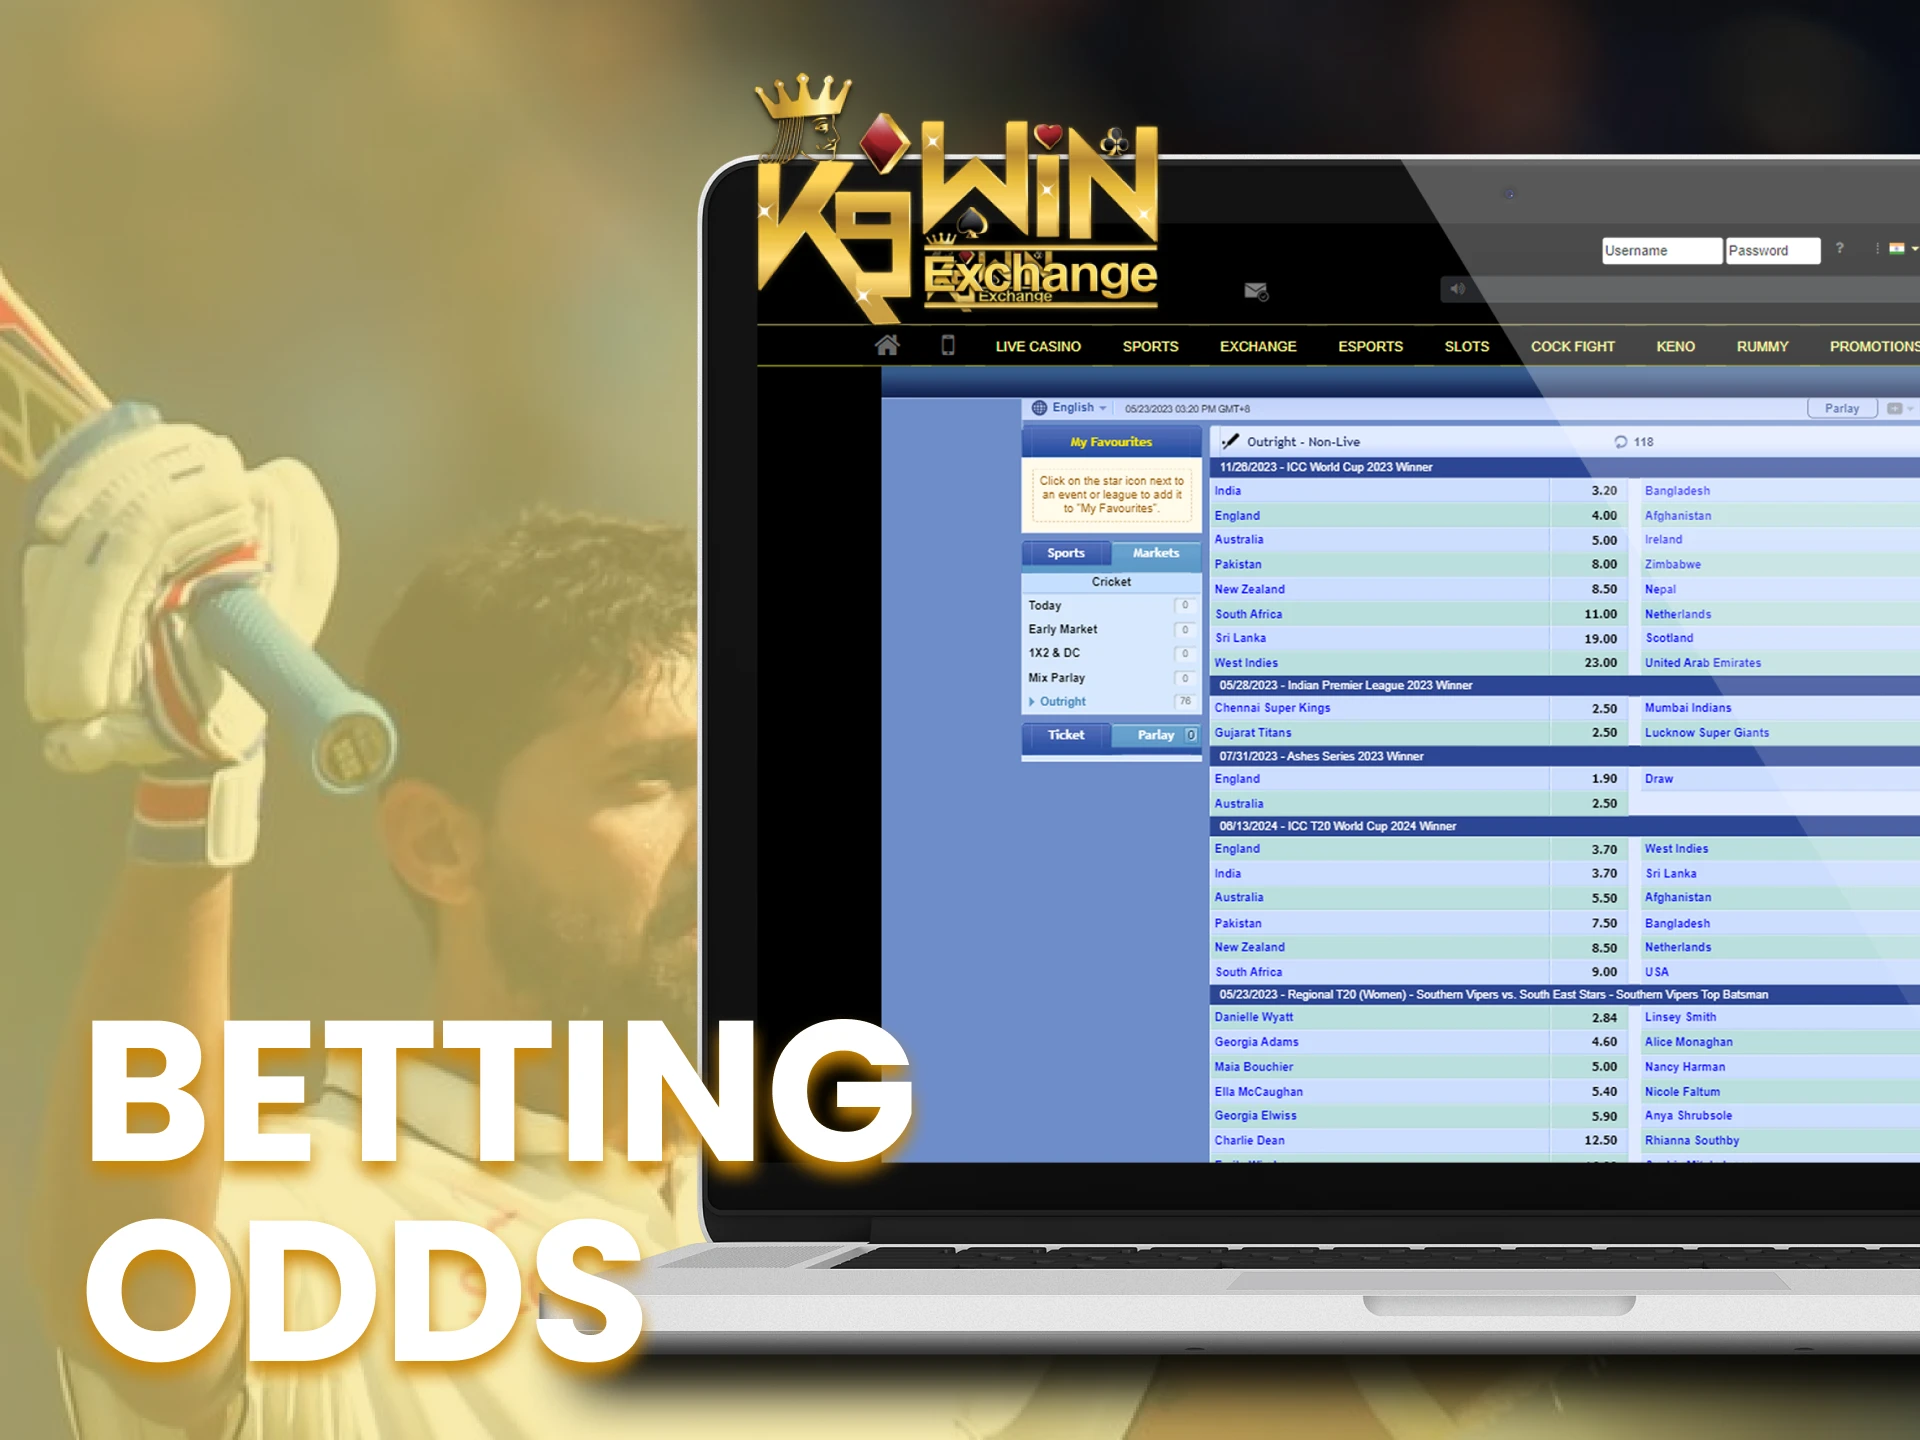 Calculate odds on the K9Win special page before making a new bet.